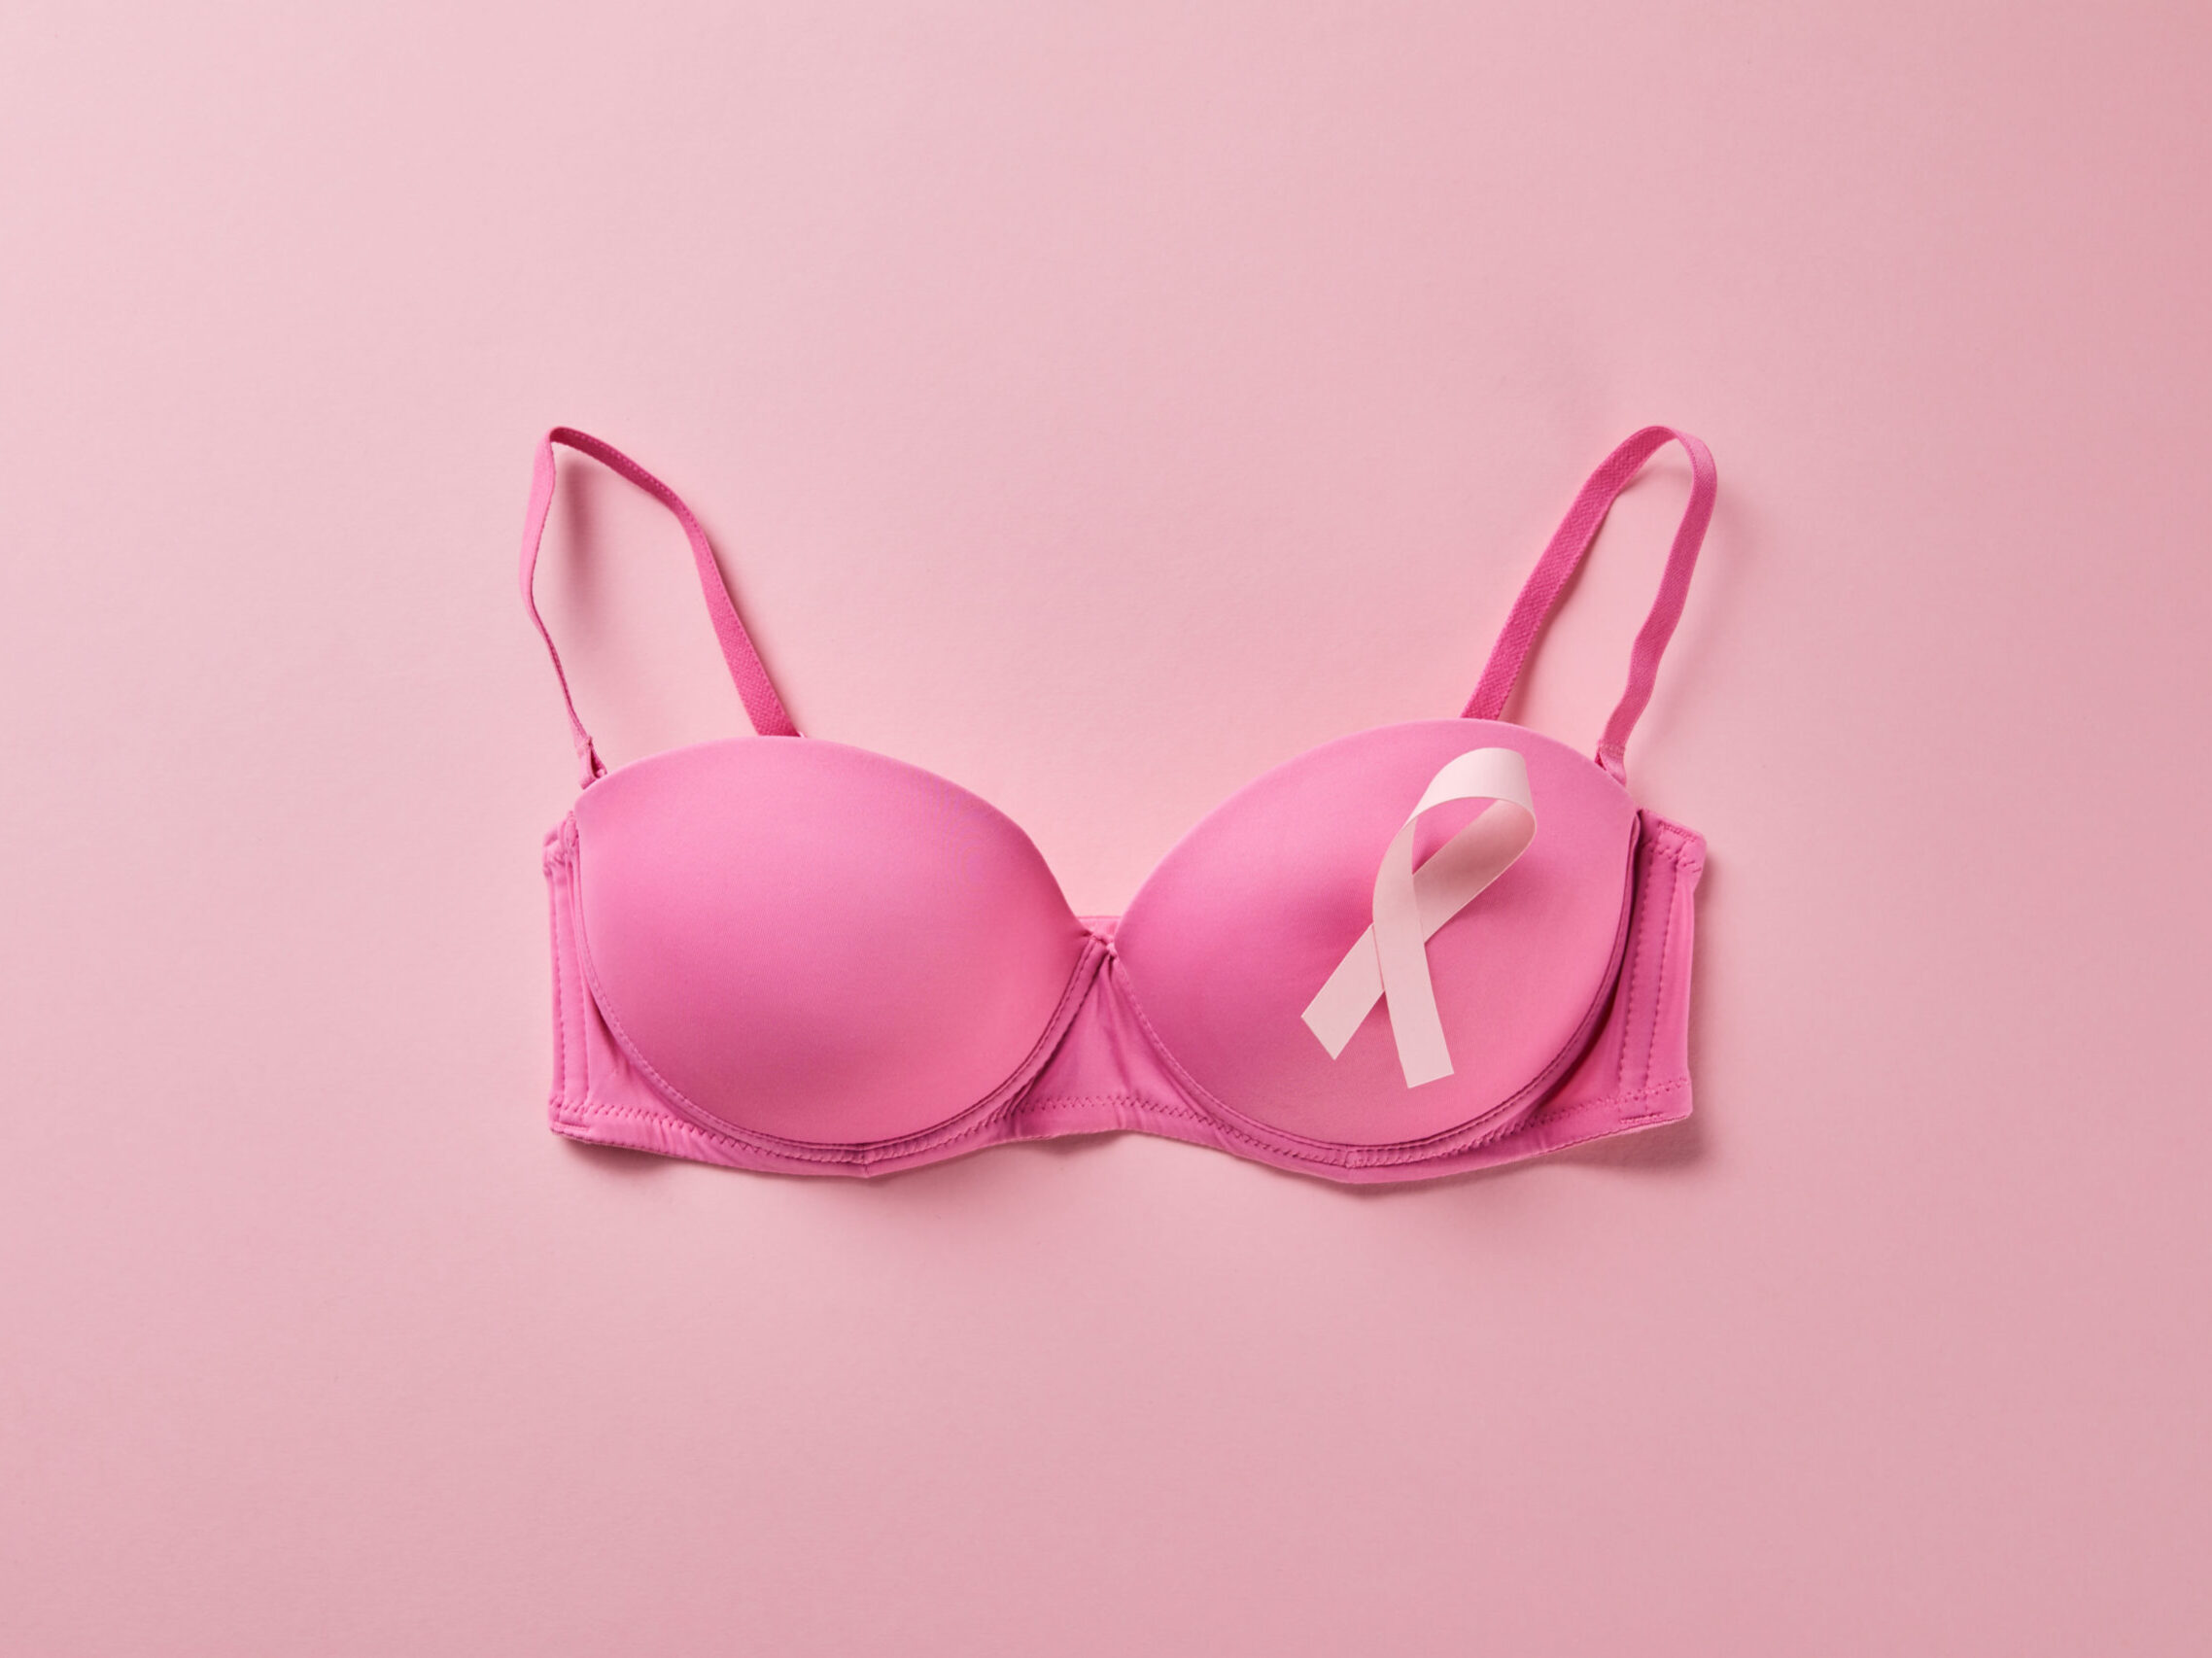 Feeling Pretty: New Additions to Mastectomy Lingerie Line - Pretty in Pink  Boutique